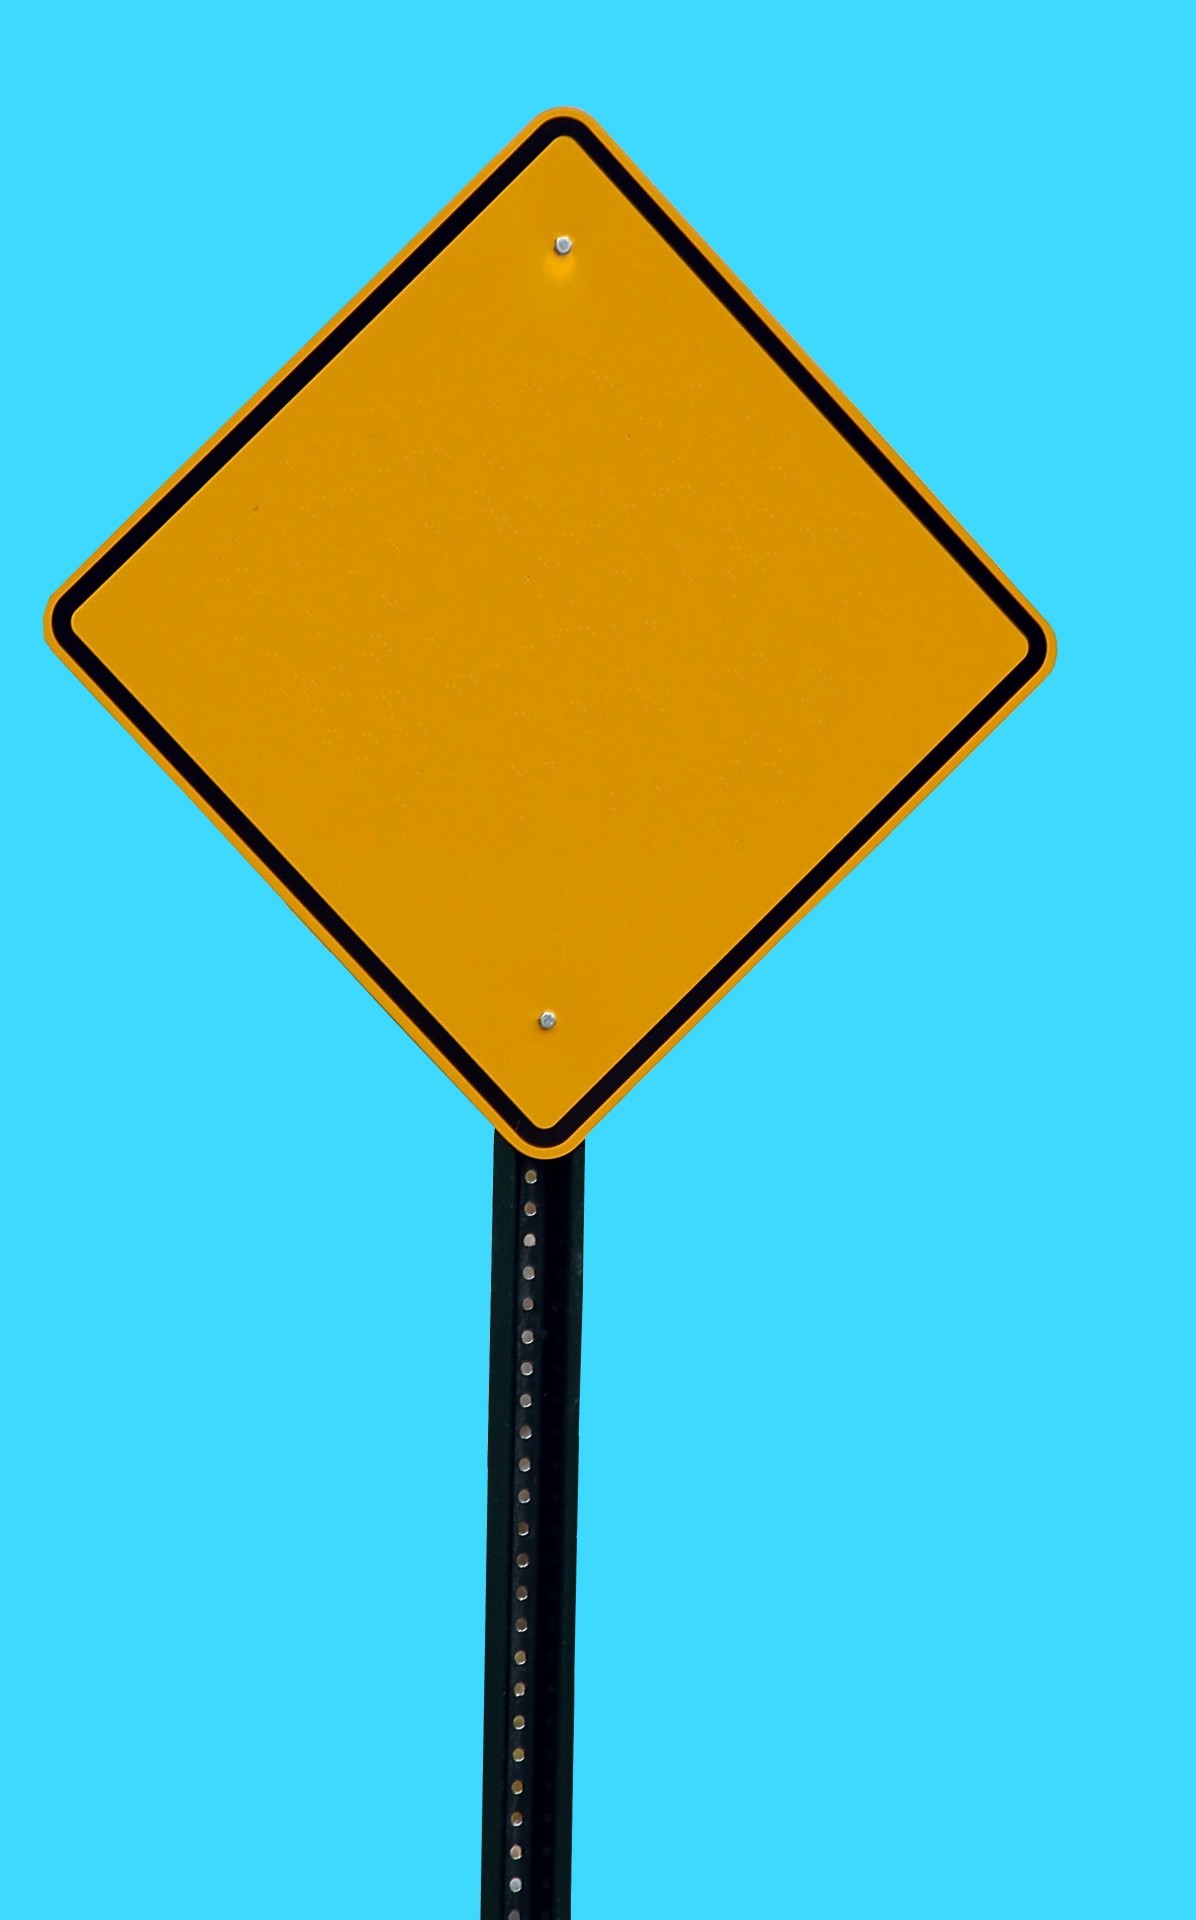 sign road blank free photo